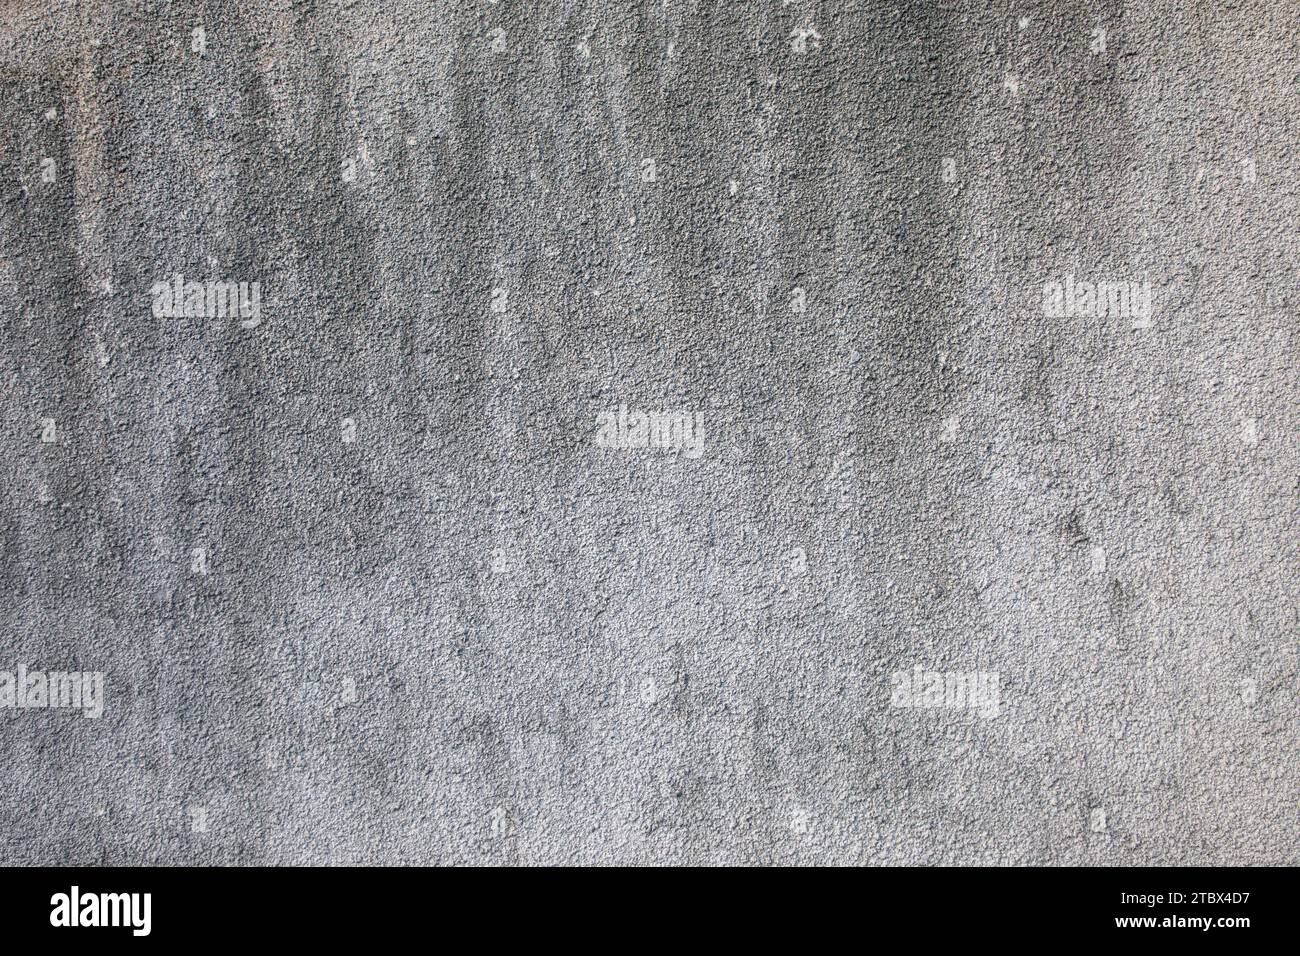 concrete grey marble surface outdoor wall floor texture gray old grunge background Stock Photo